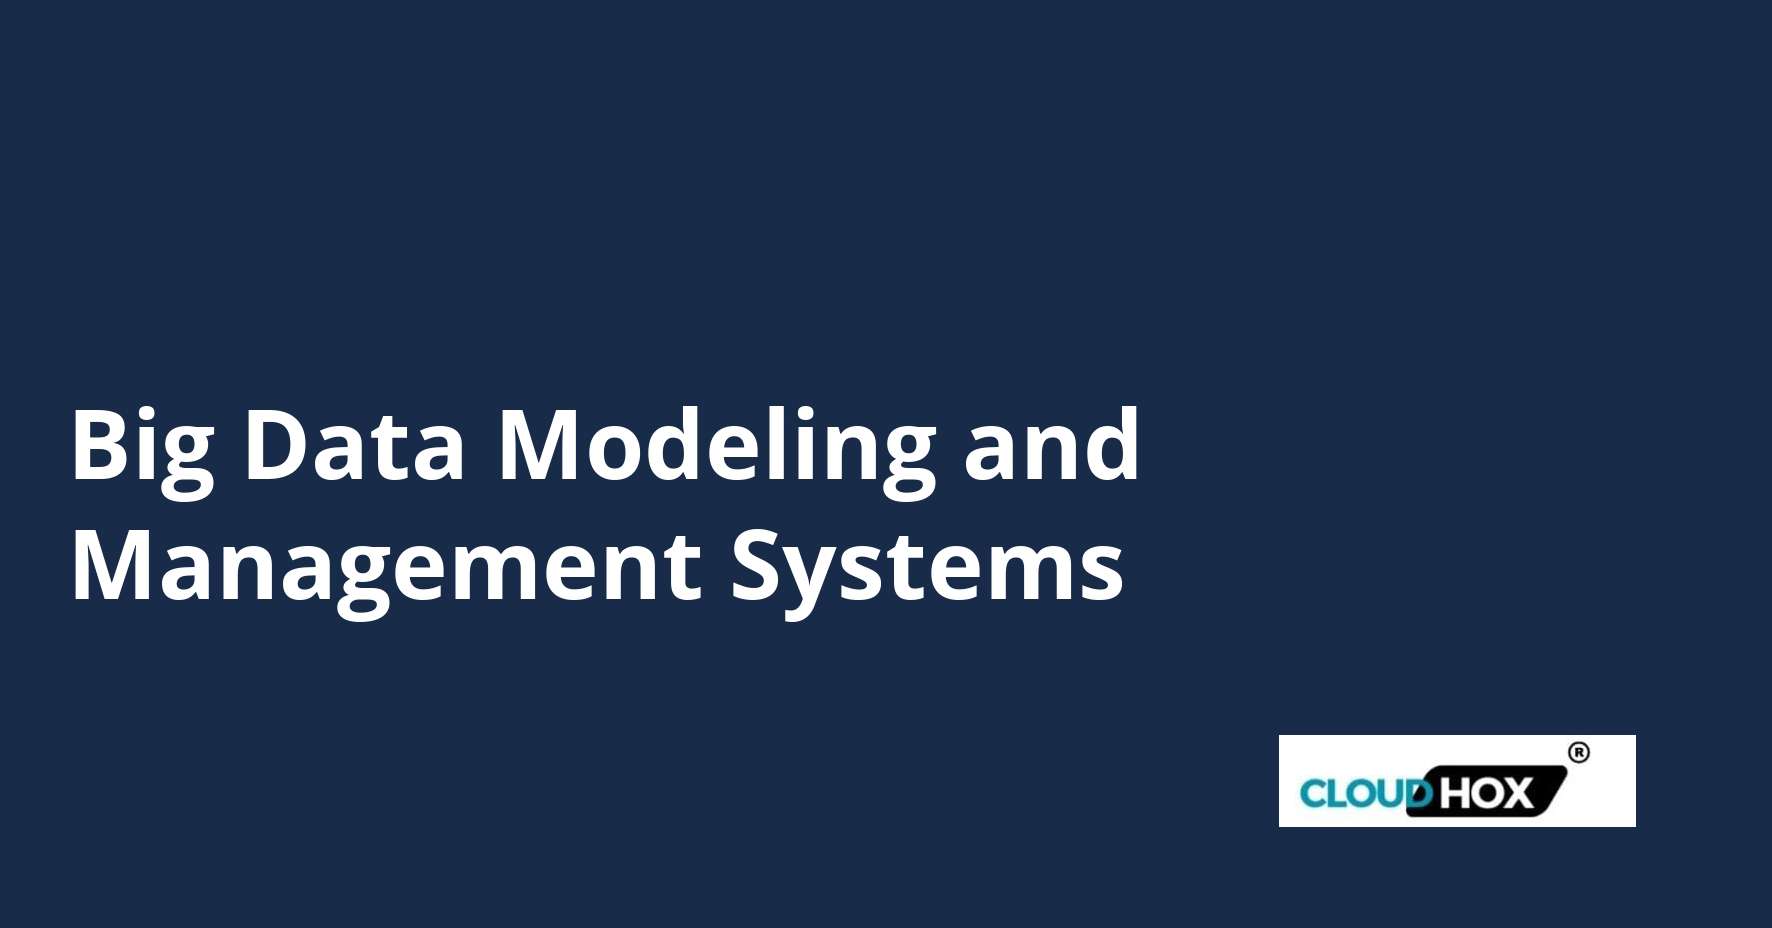 Big Data Modeling and Management Systems